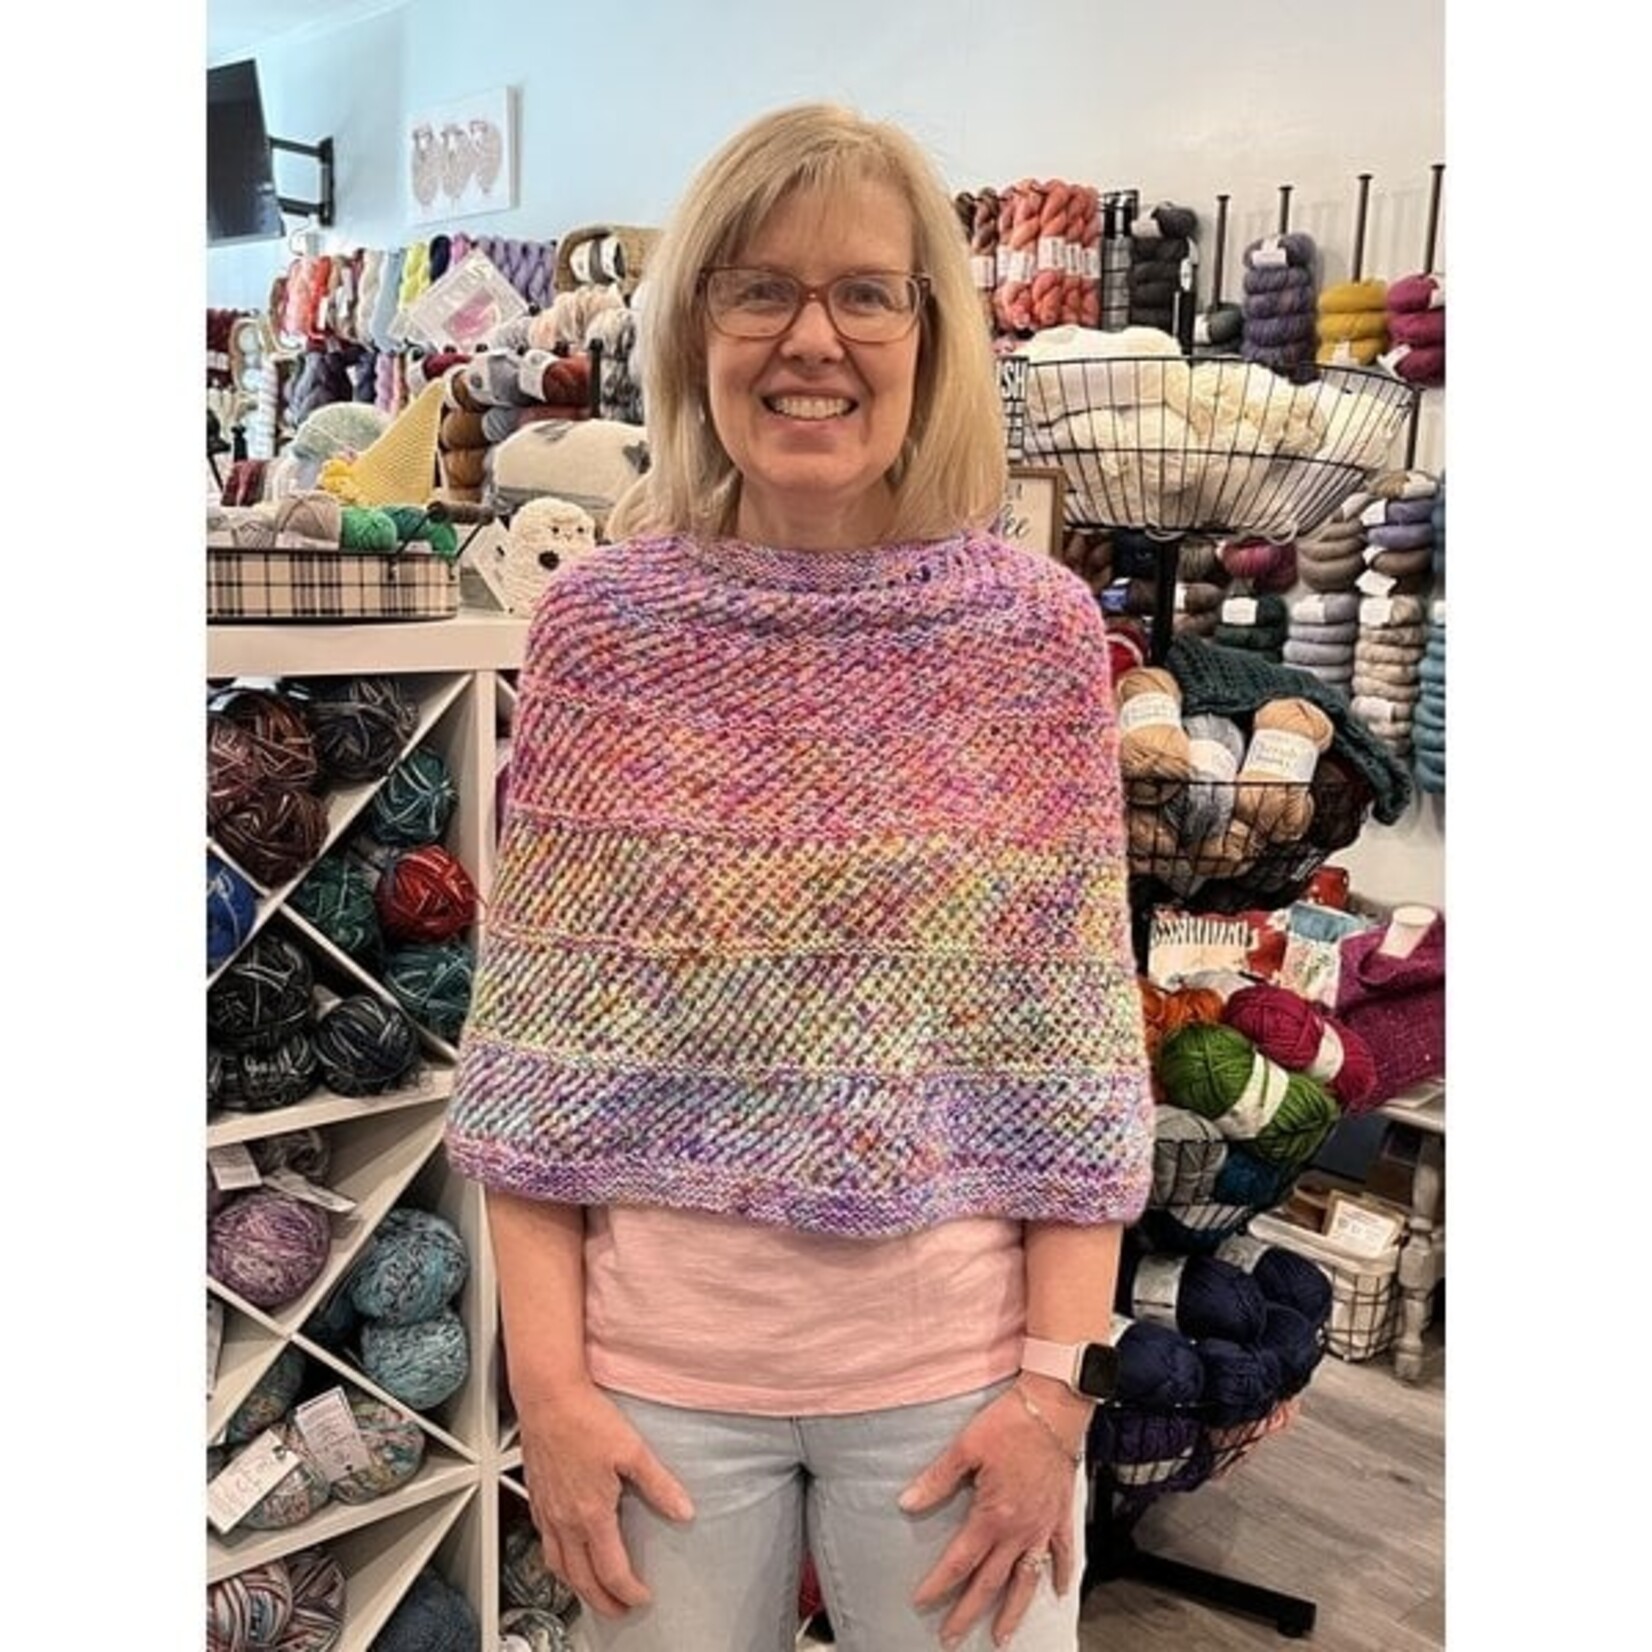 KKN Knitting with Barb on Tuesday – 5/7, 5/14, 5/21, 5/28